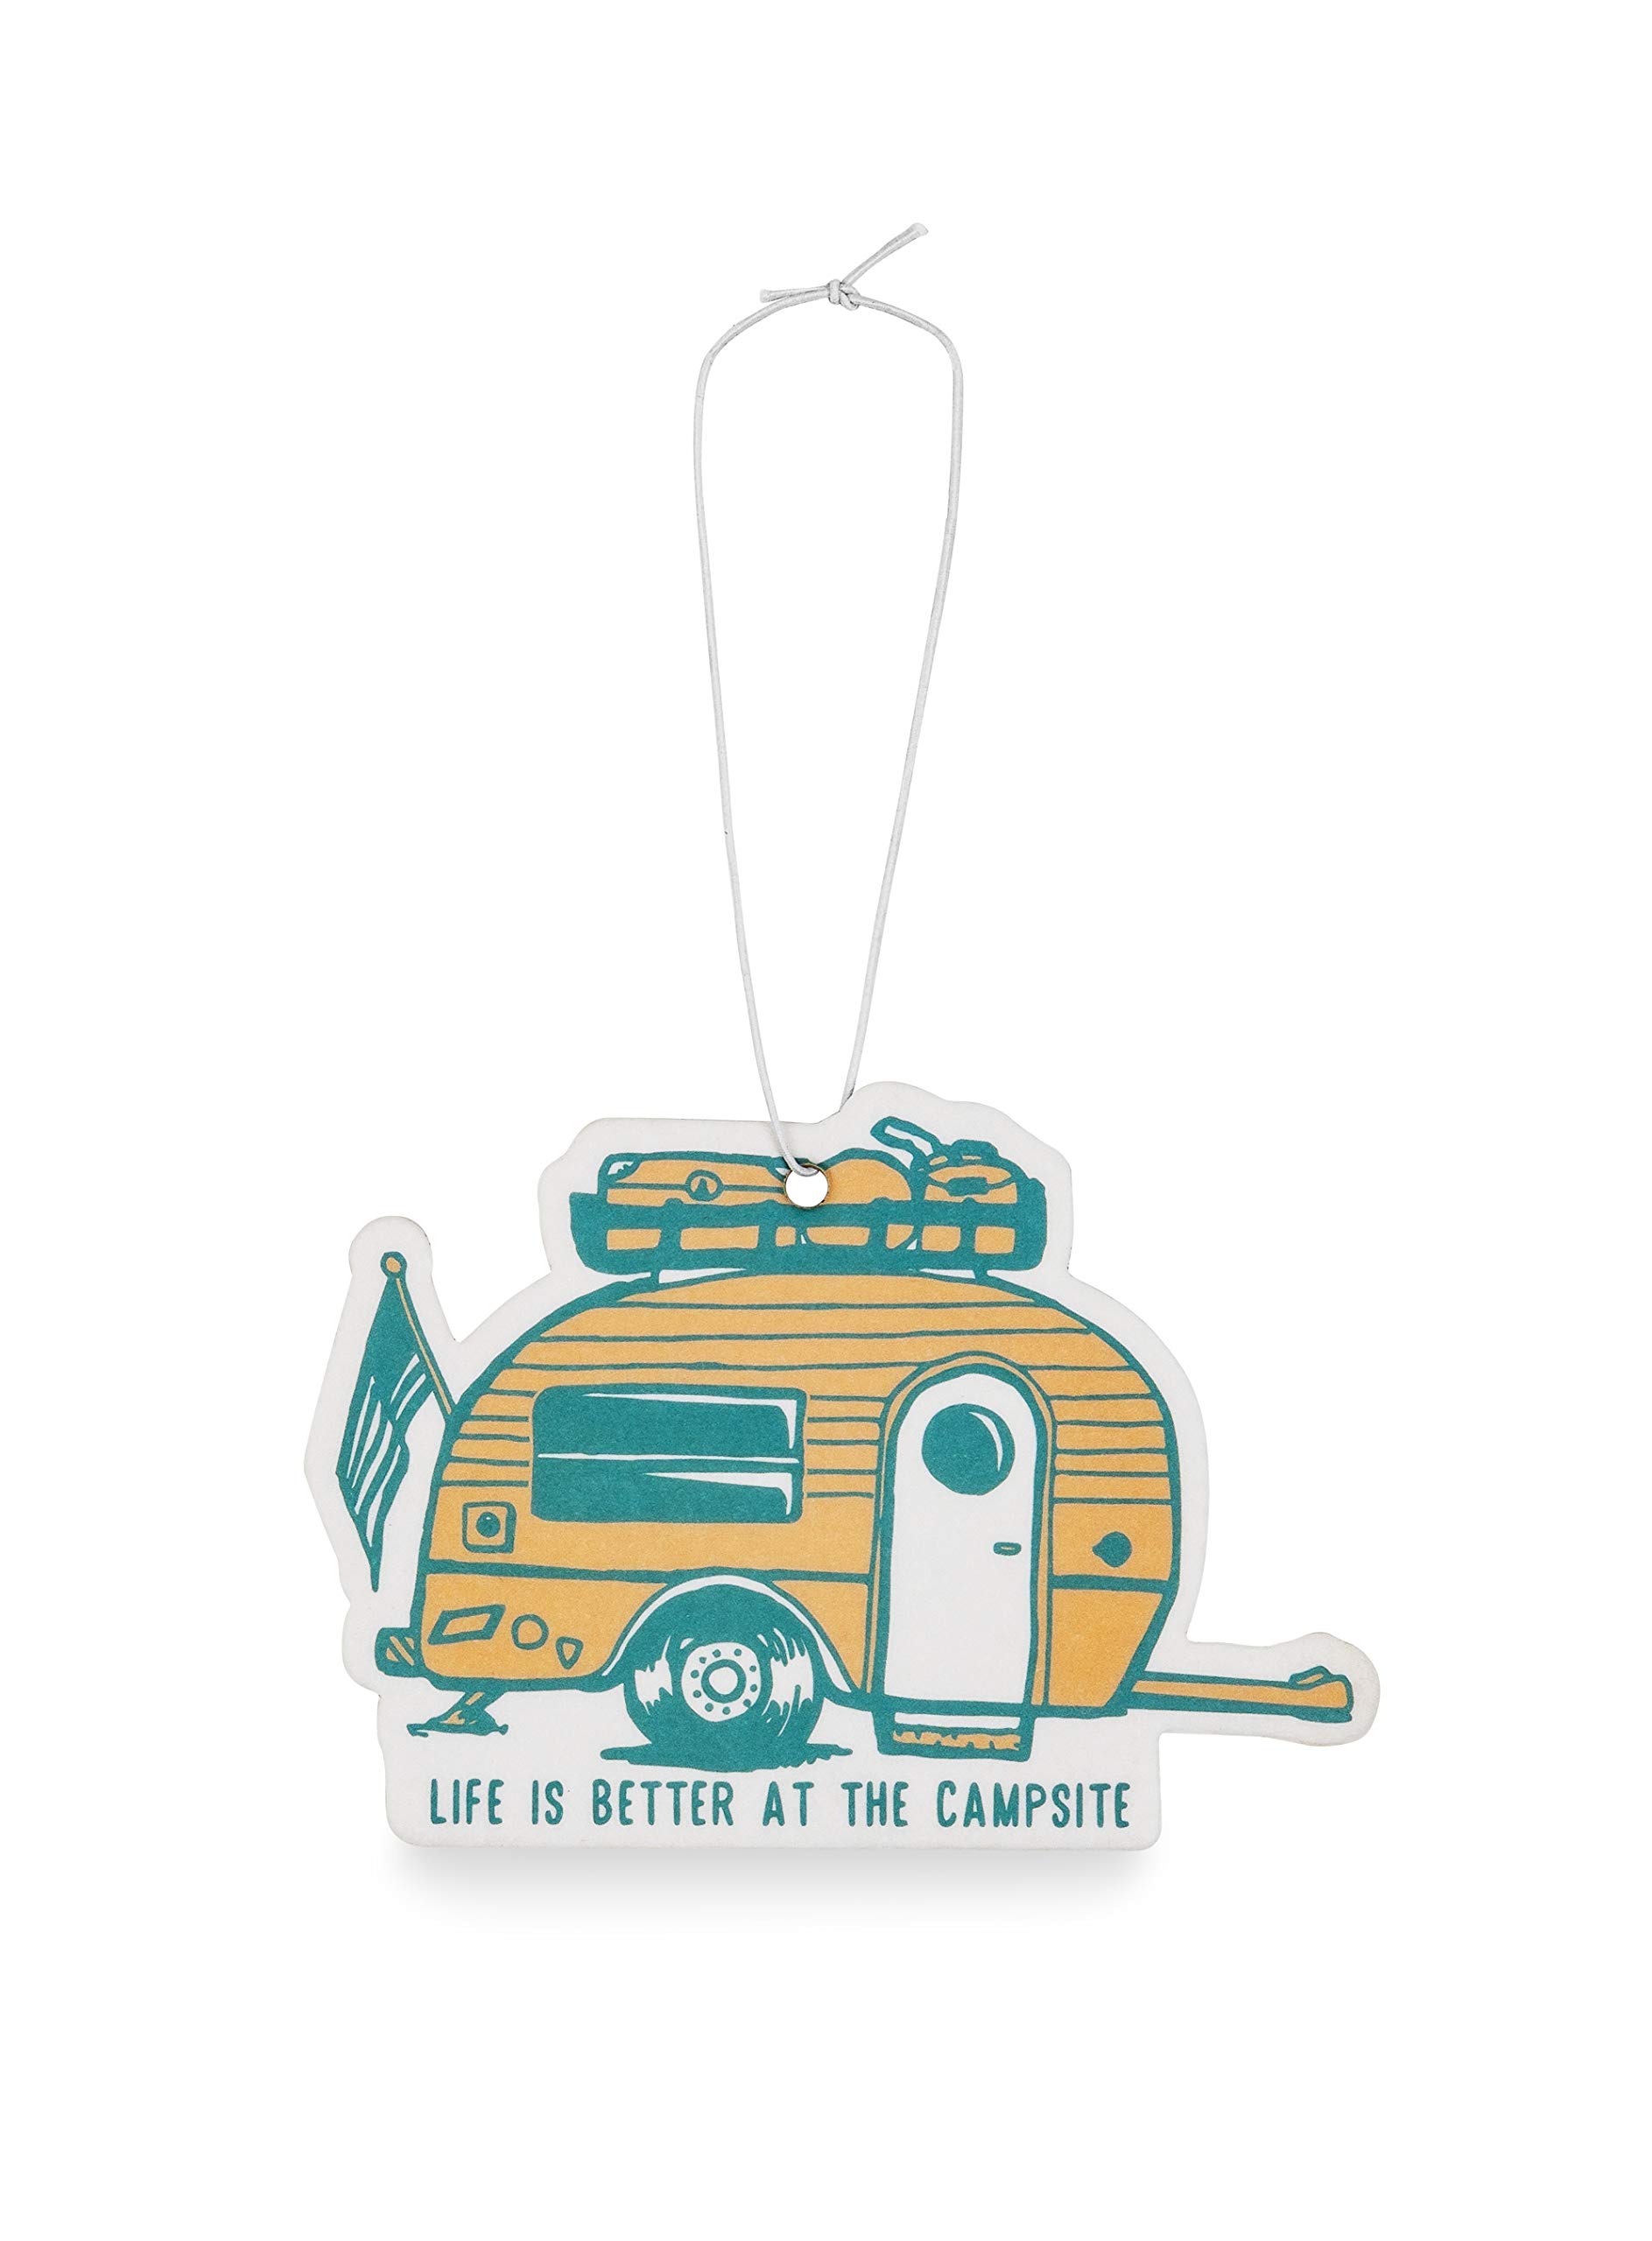 LIFE IS BETTER AT THE CAMPSITE AIR FRESHENER ALONG THE SHORE